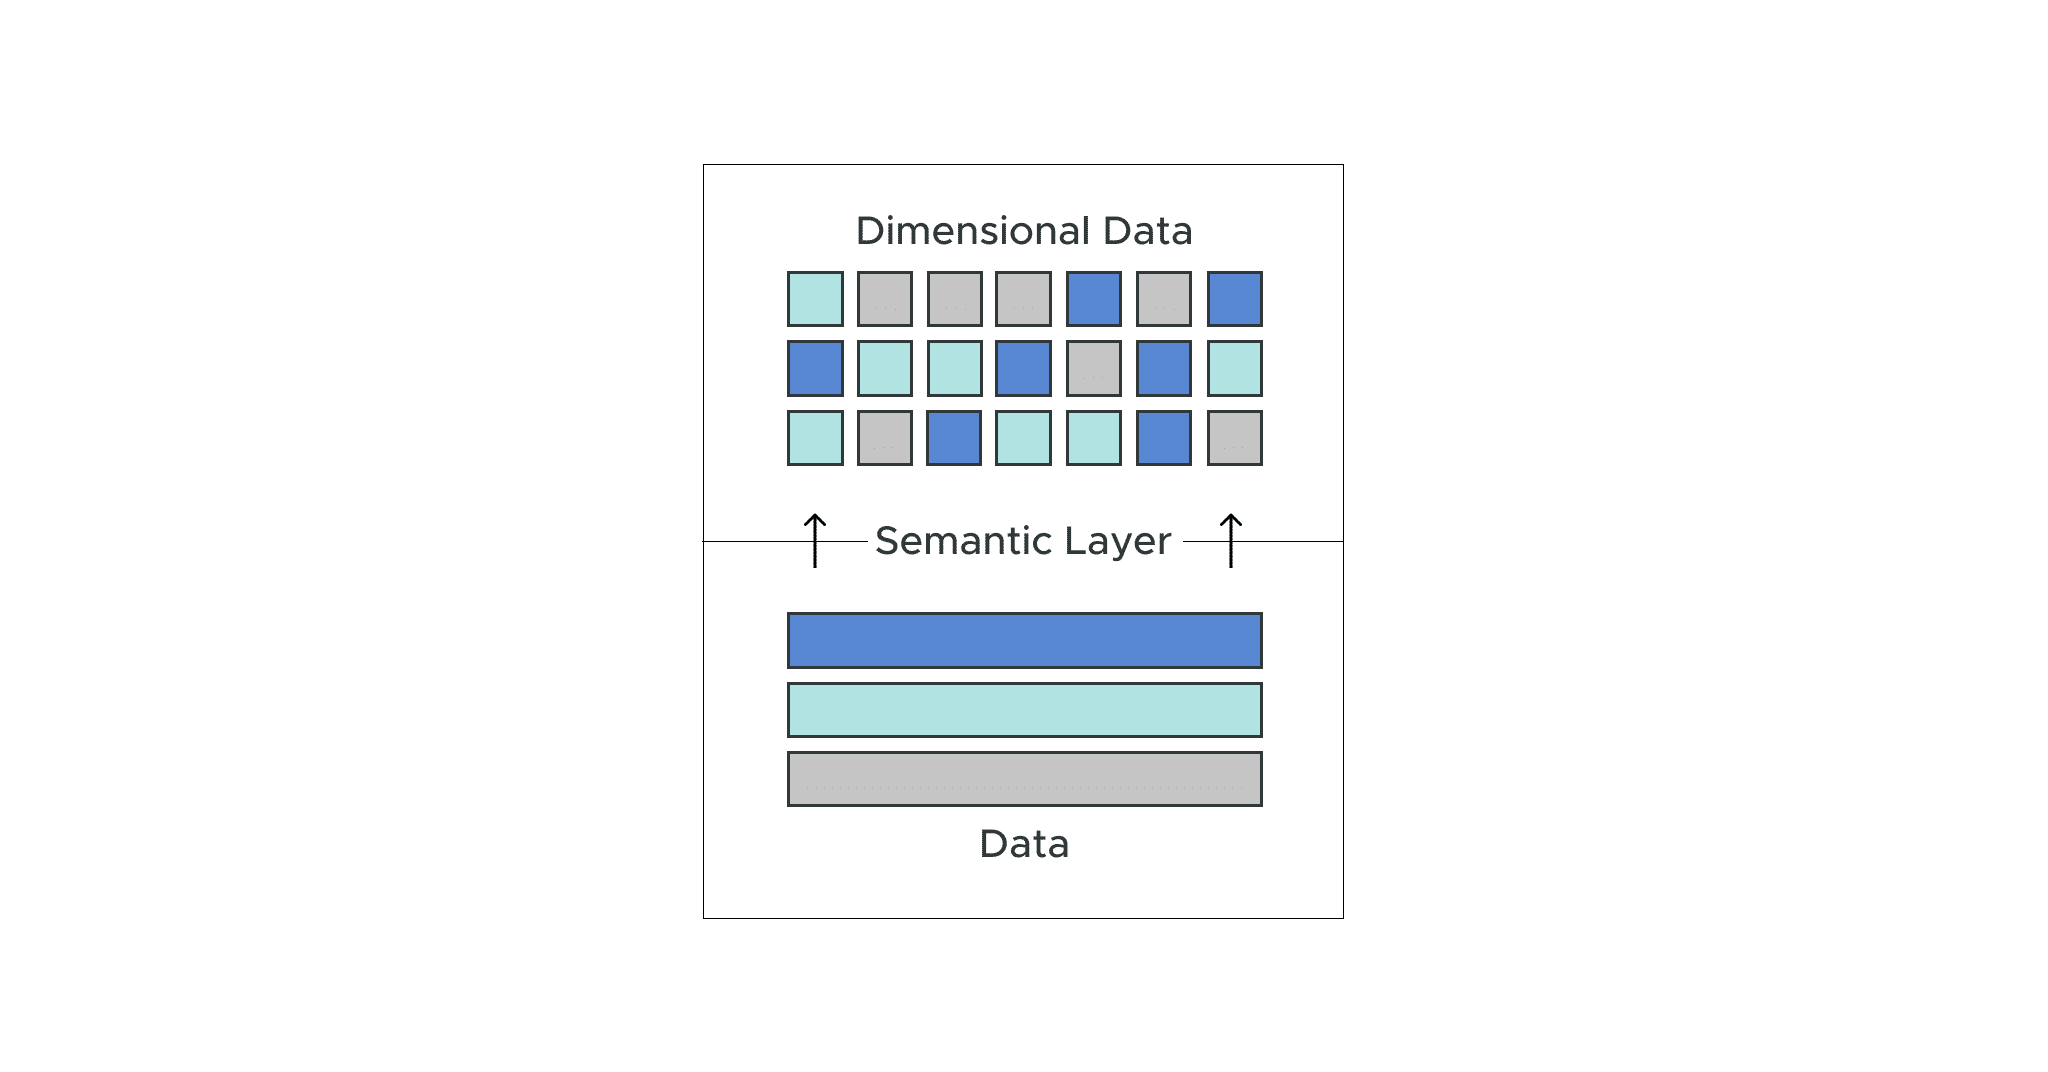 Why is Dimensional Data Modeling a Core Capability of the Semantic Layer?